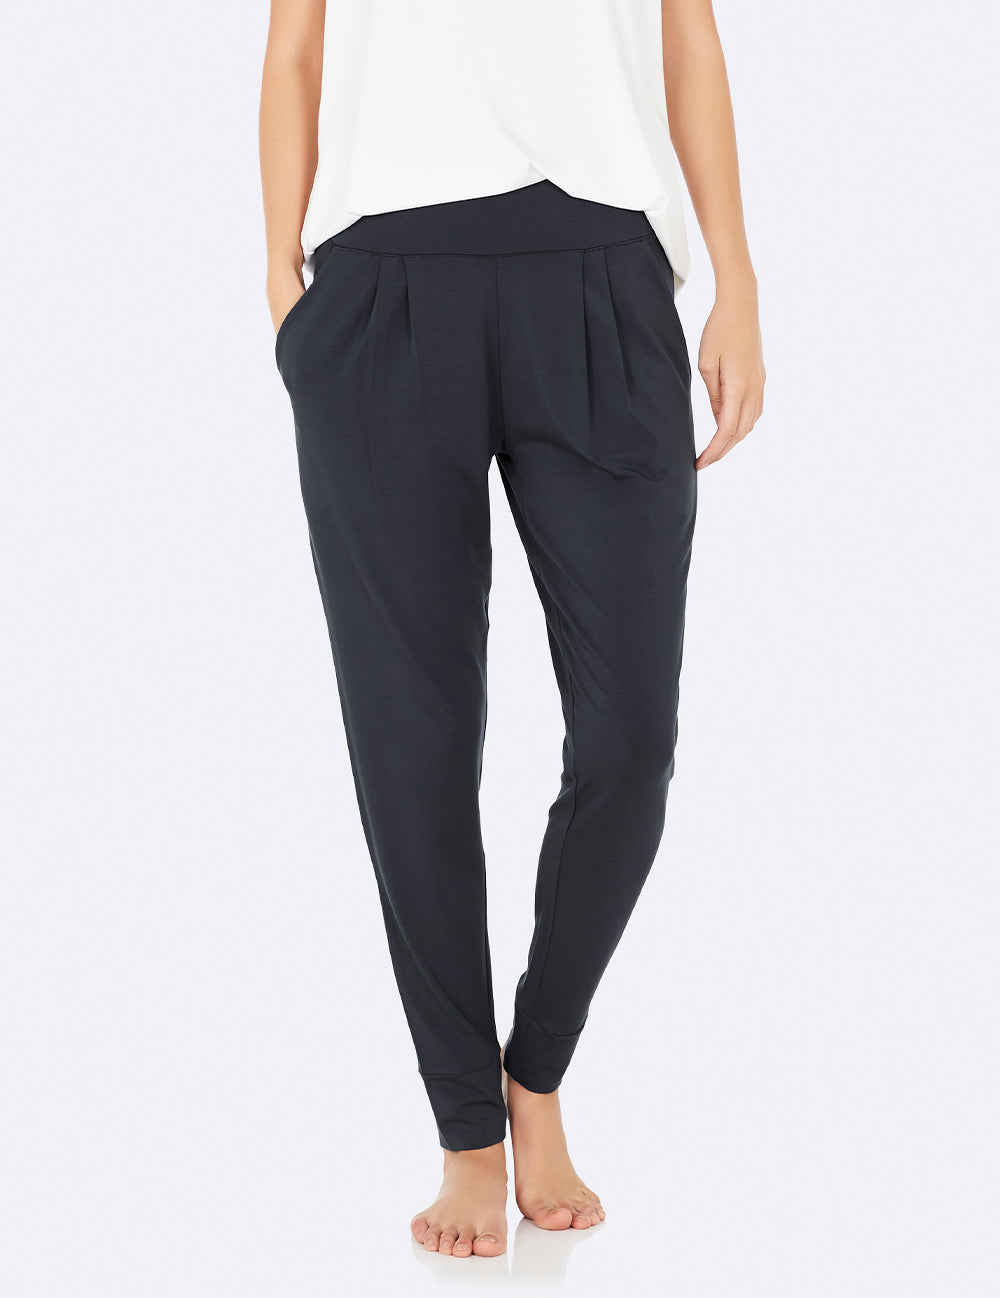 Buy Boody Downtime Lounge Pants - Black Online